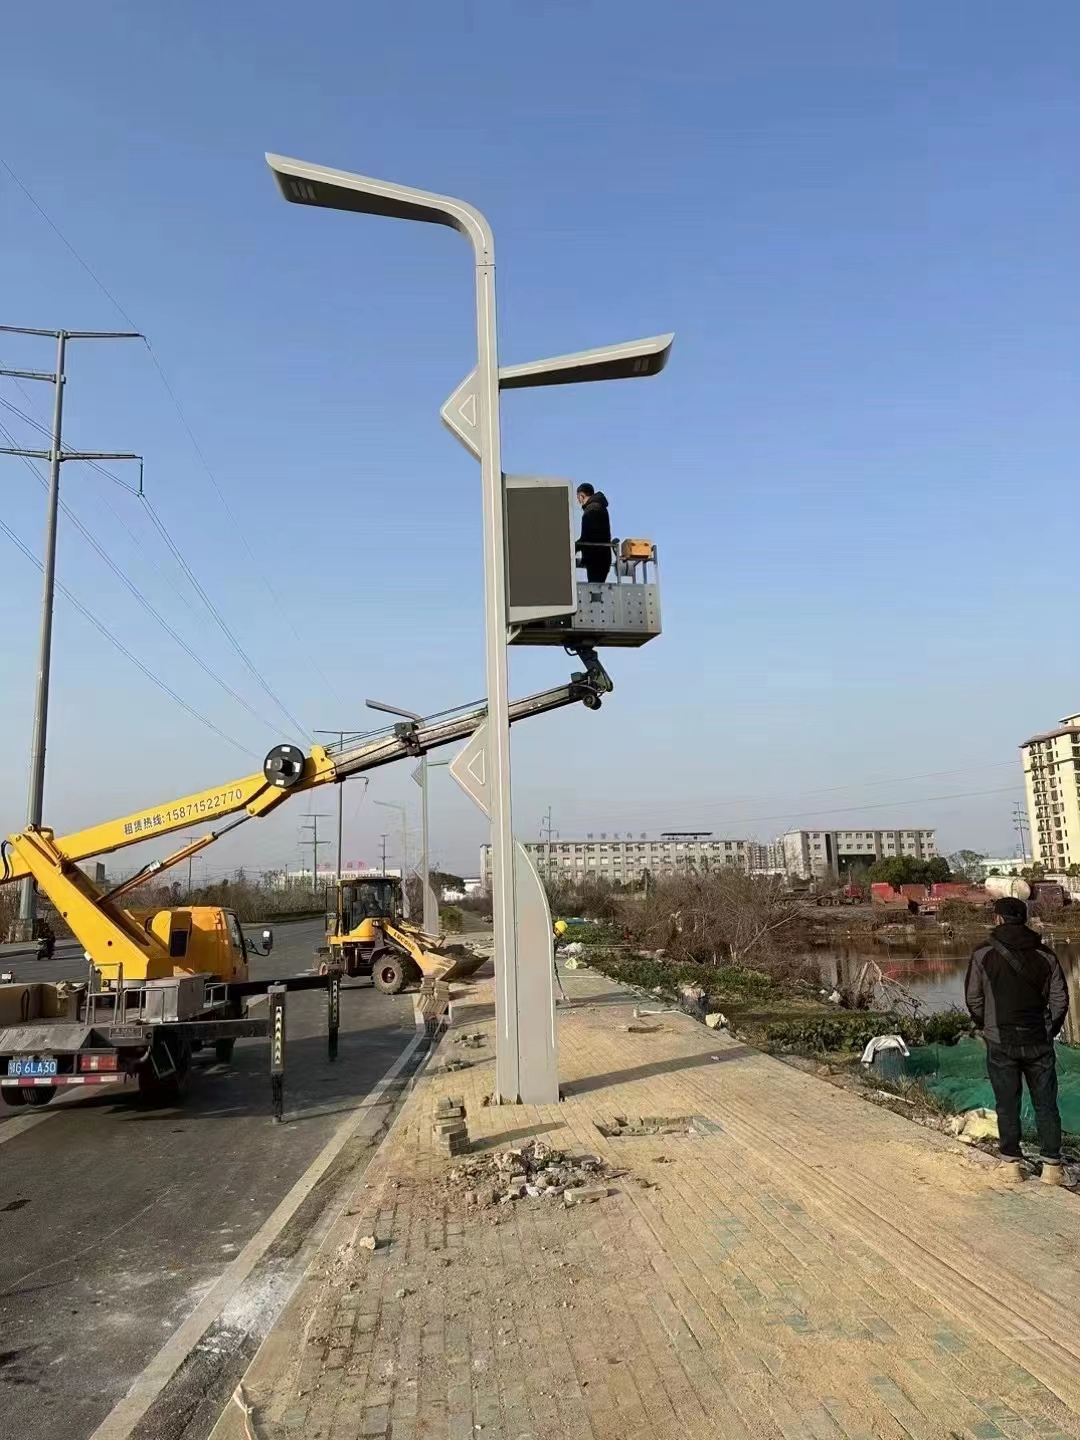 Smart Poles manufactured and installed by Anhui Xingtong Technology Co., Ltd